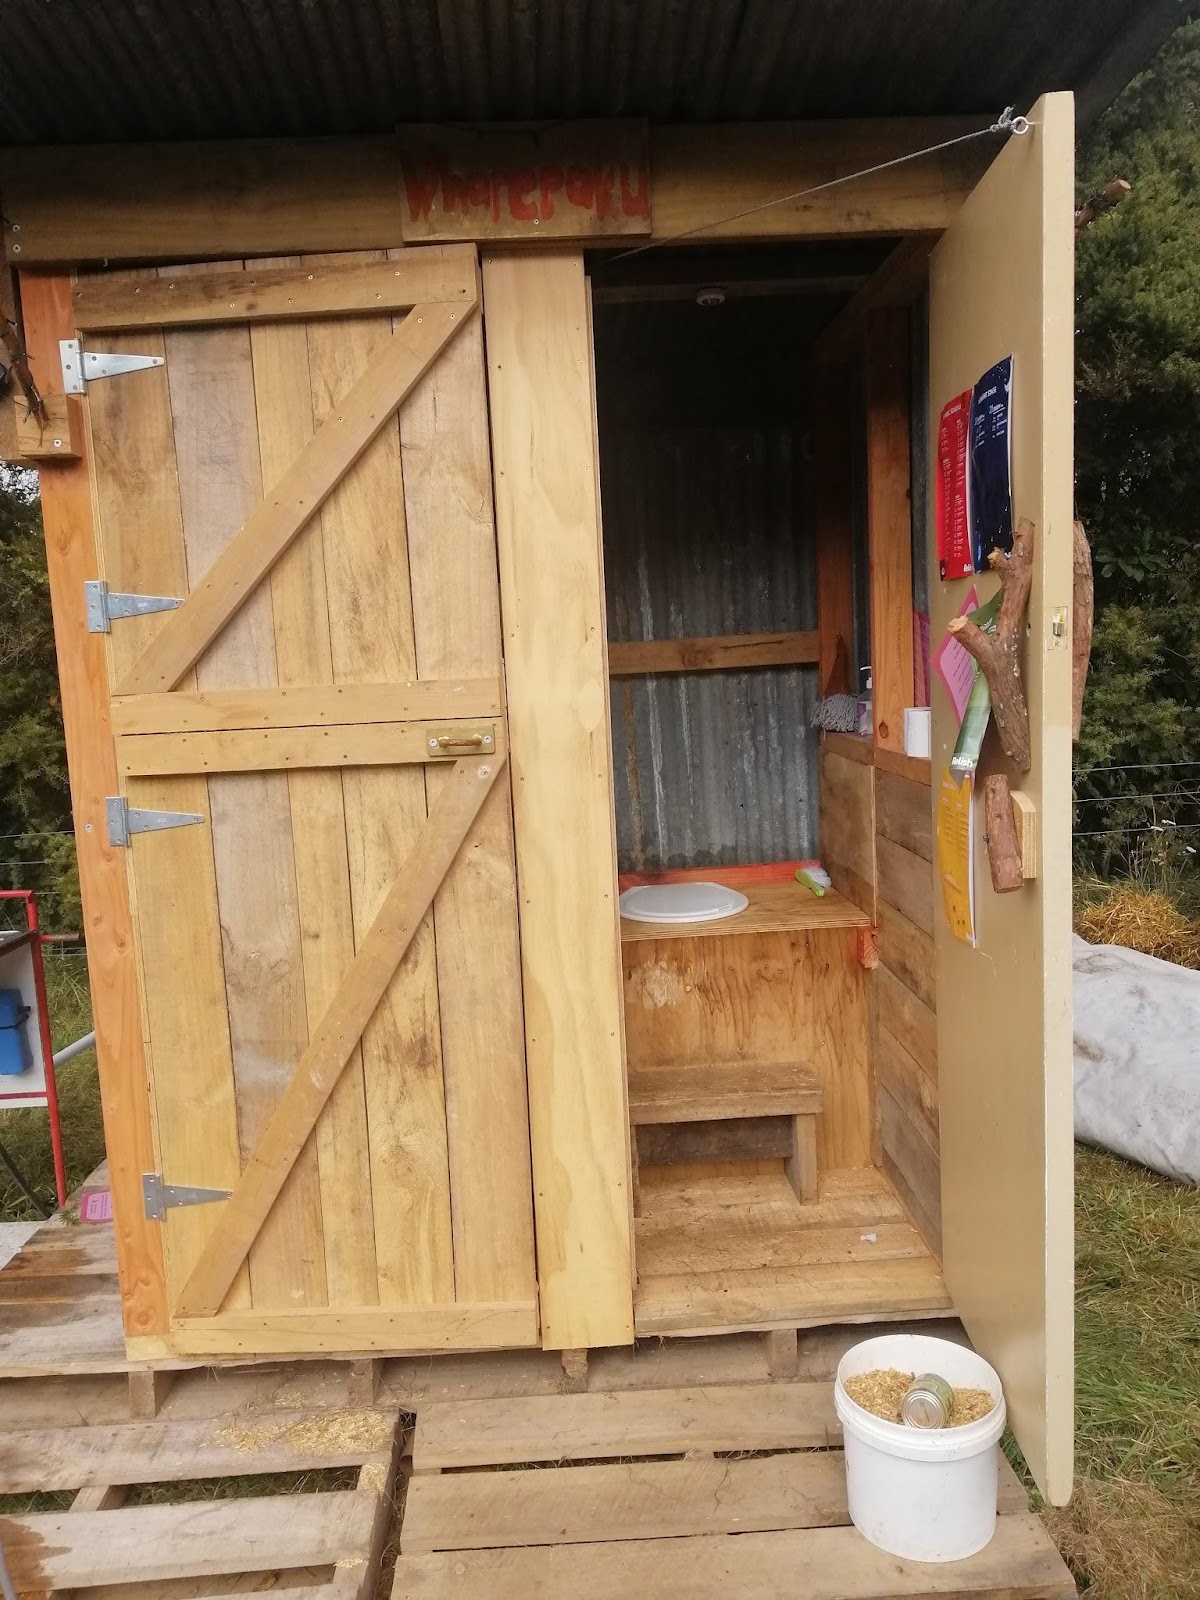 A clean, wooden, compostable toilet with an open door